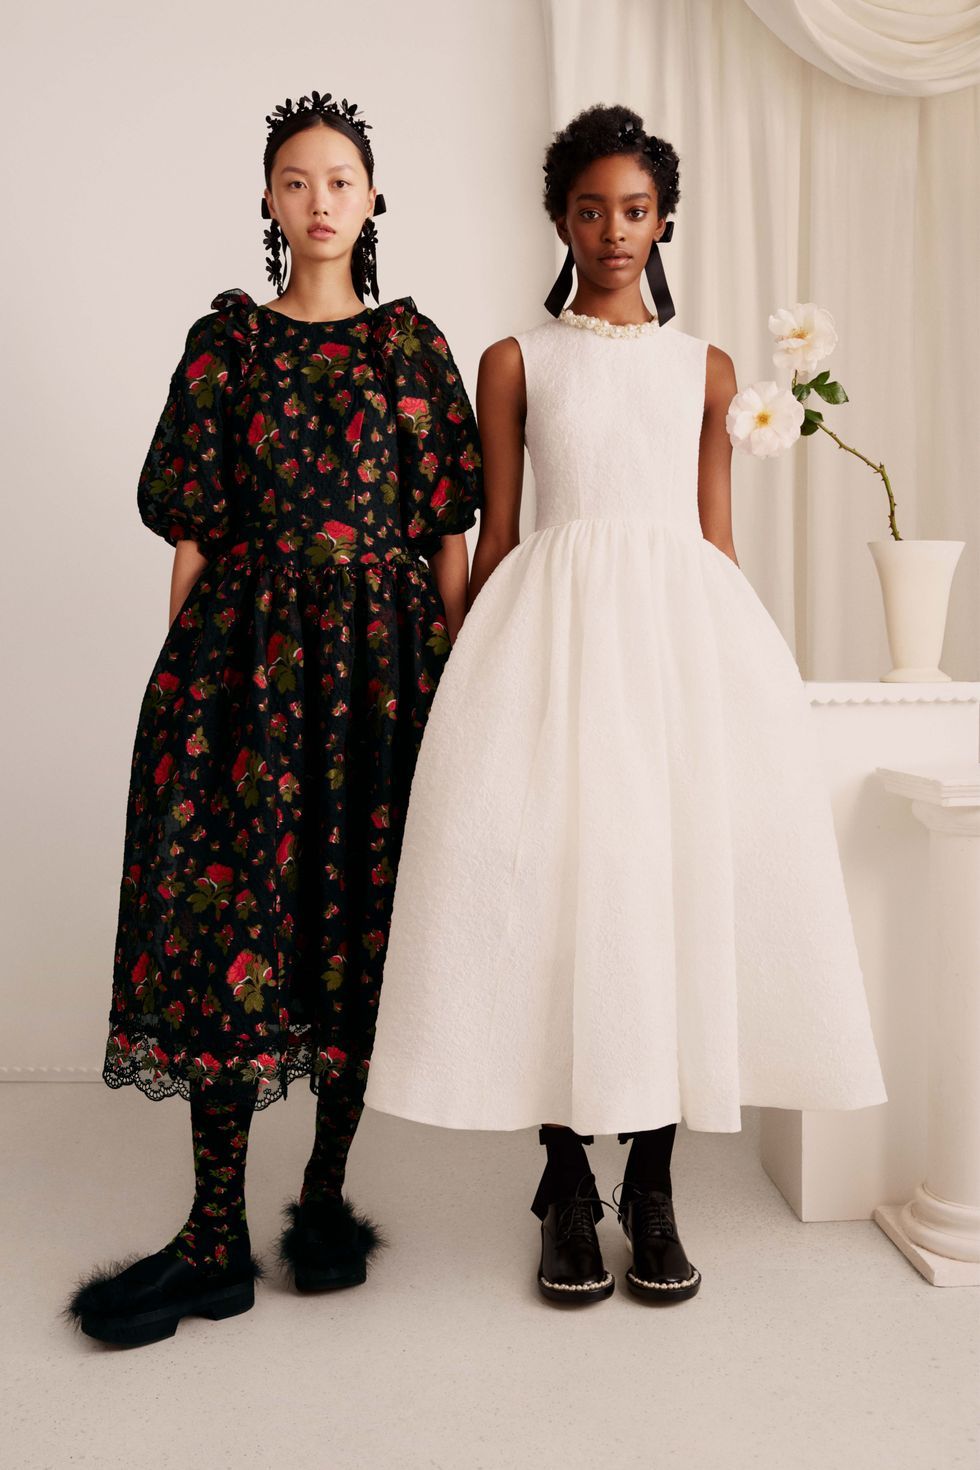 Simone Rocha's collection for H&M is now available to shop